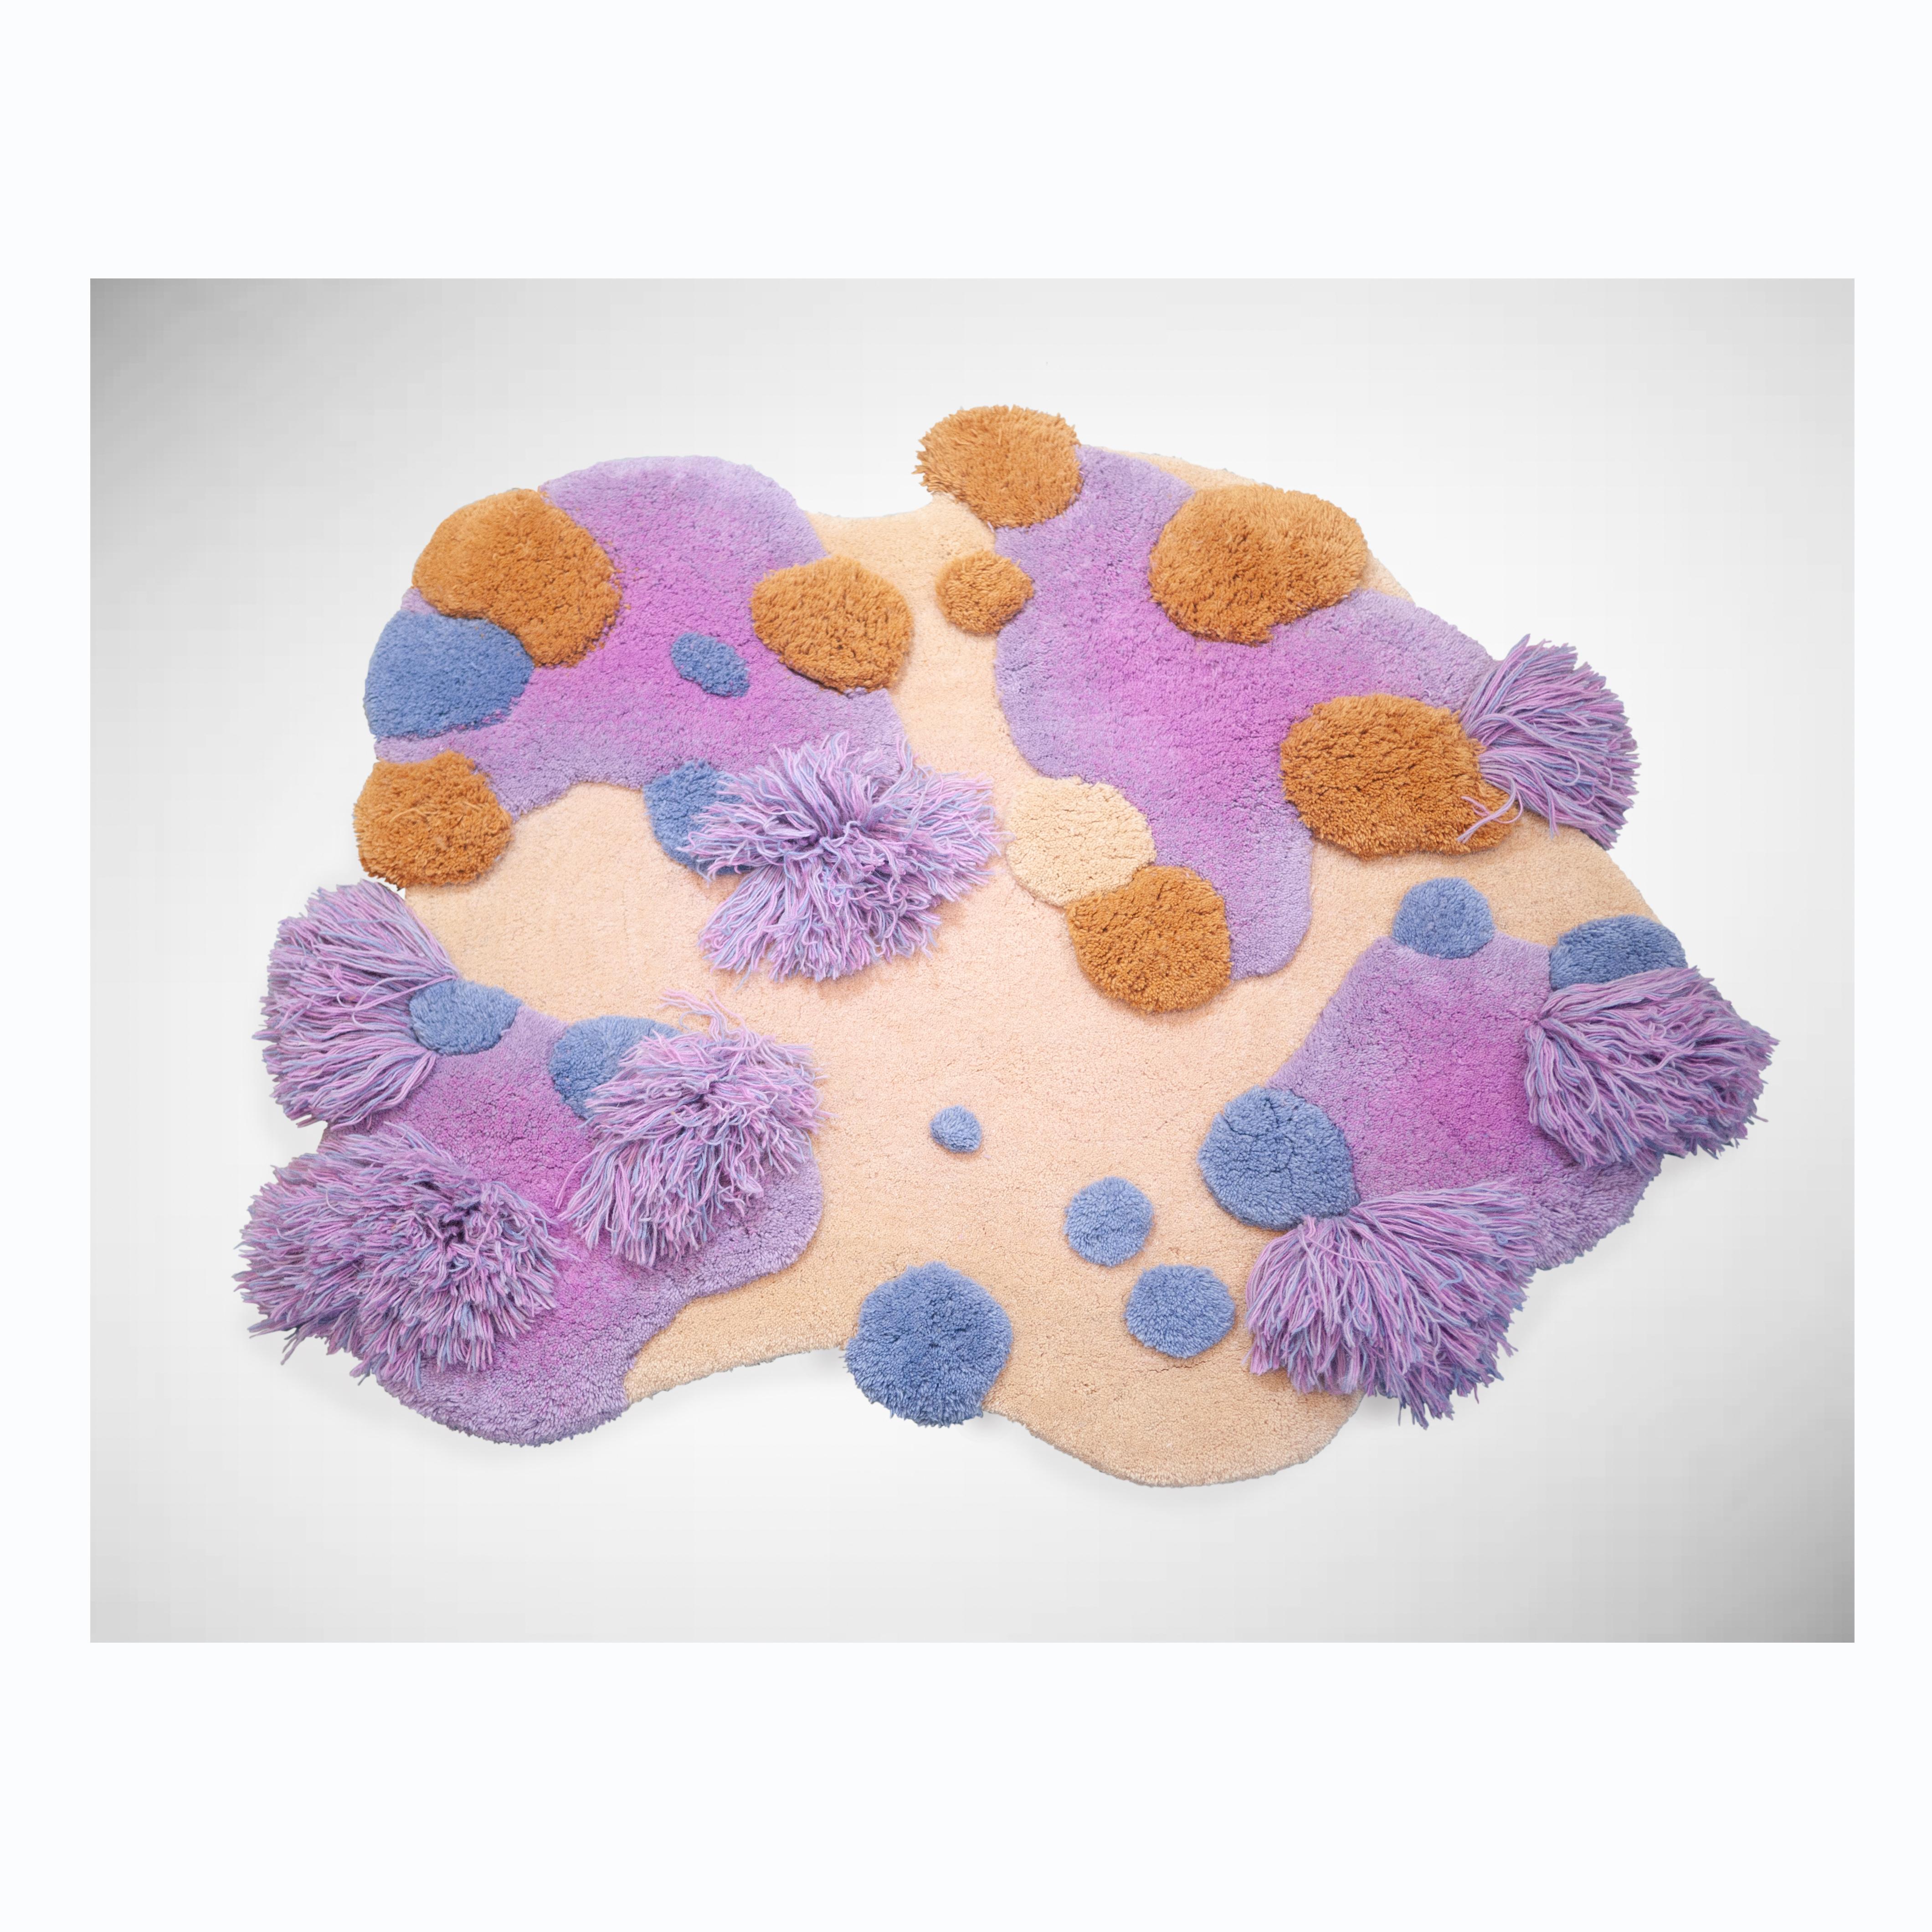 Velvet Tingle is one out of a series of 5 rugs/tapestries specially made for Objects with Narratives.
Fuzzy Friends are physical representations of the soft spots in our mind, places we retraet to when we need to recharge. Tactile moments of warmth